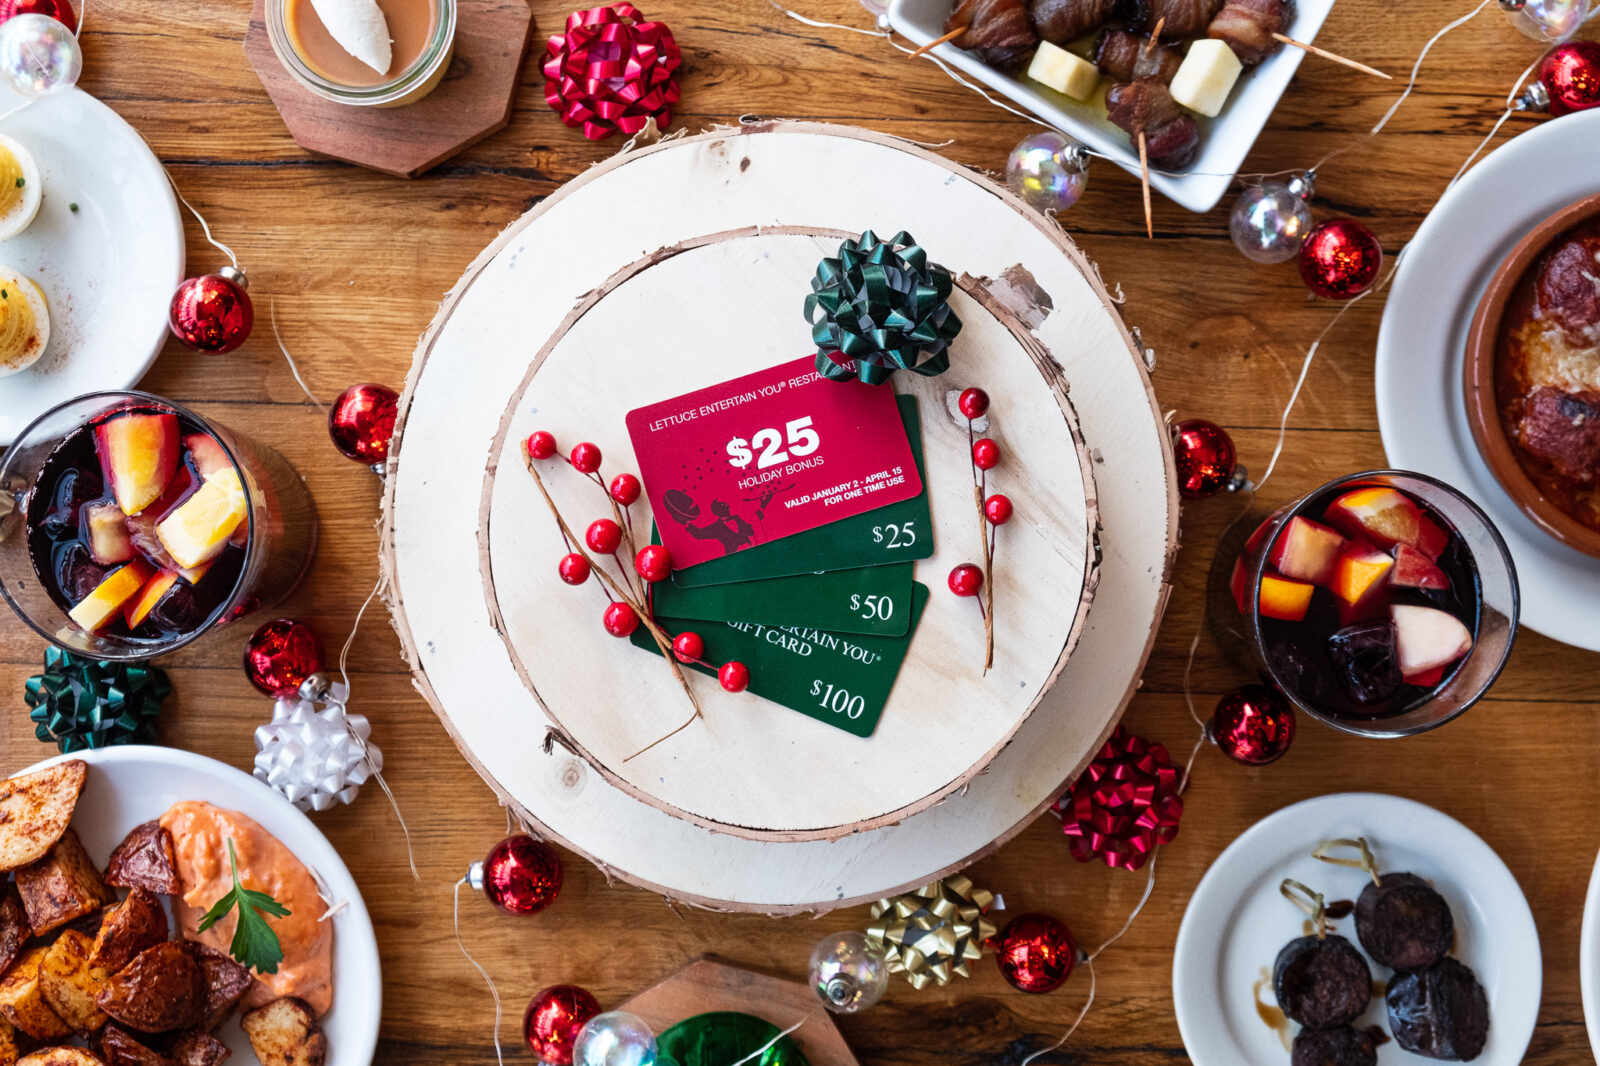 Lettuce Entertain You Holiday Gift Cards surrounded by holiday decorations and Cafe Ba-Ba-Reeba! classic dishes for the Free $25 Holiday Bonus Gift Card Campaign